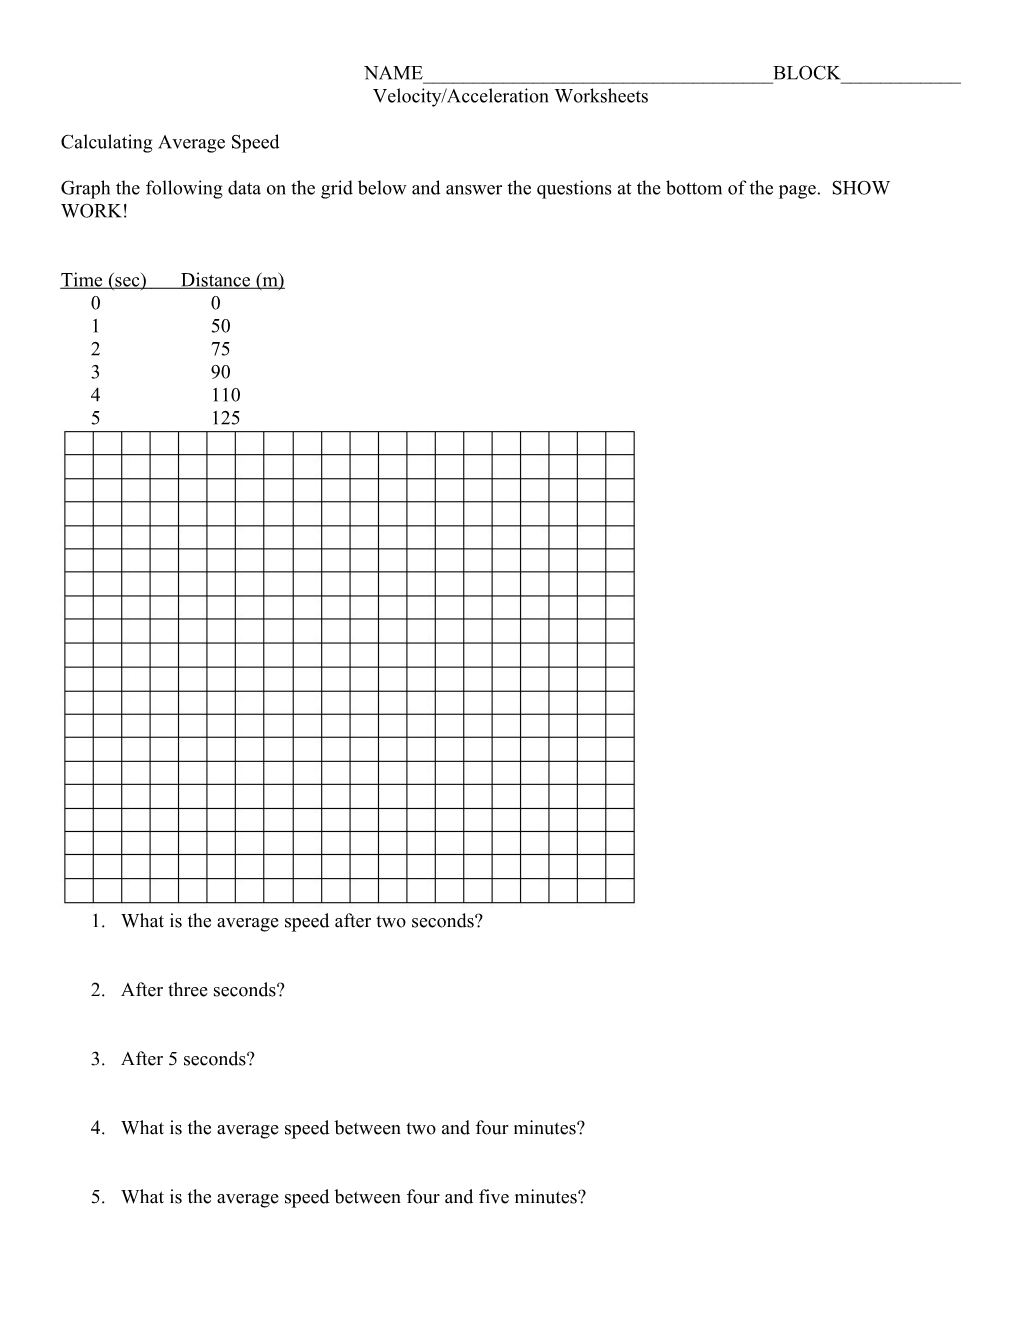 Velocity/Acceleration Worksheets s1